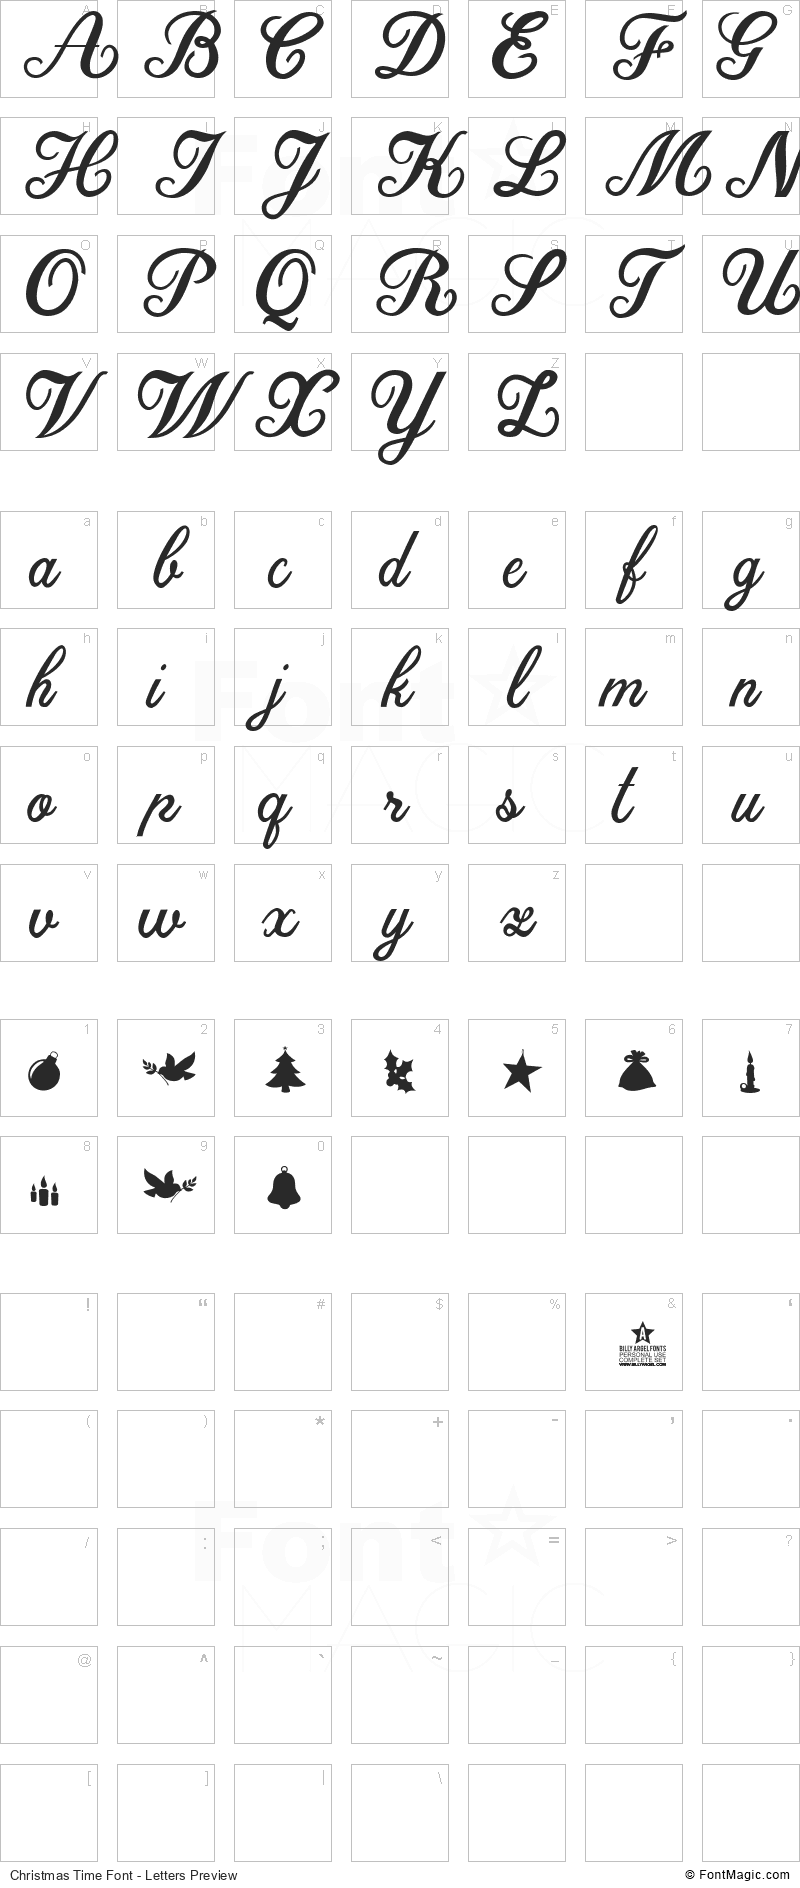 Christmas Time Font - All Latters Preview Chart